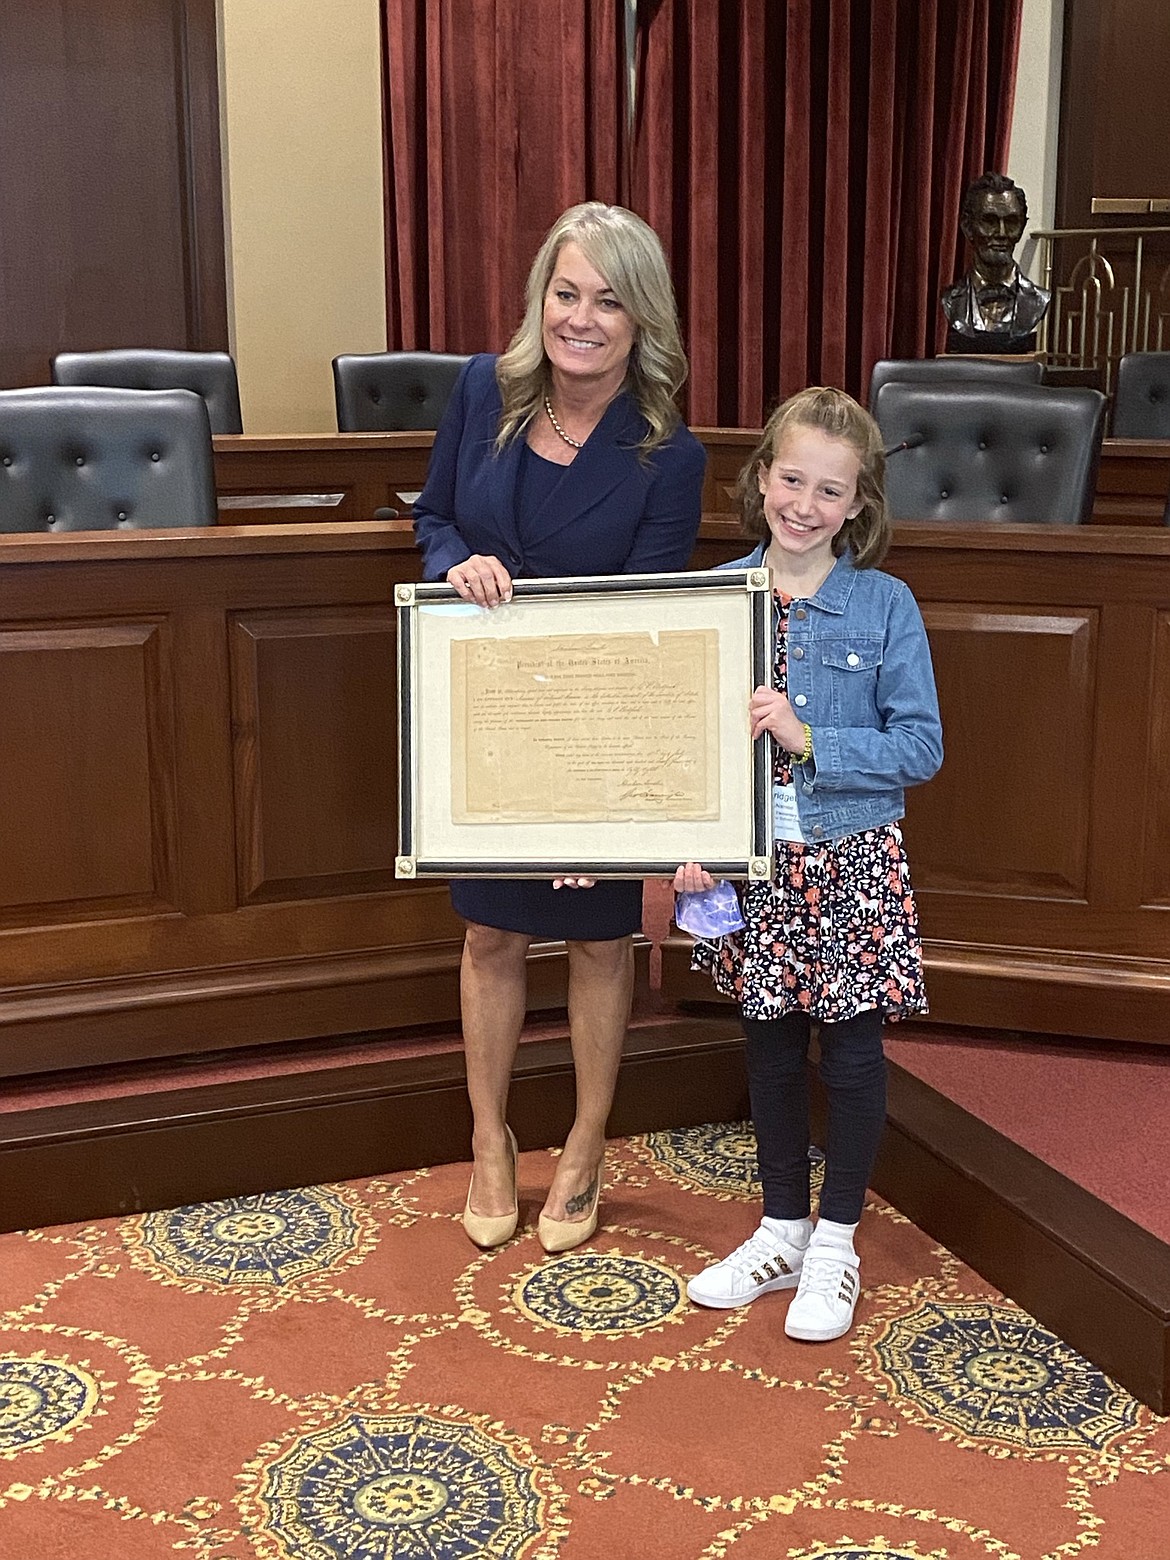 In her role on the state student advisory council for Idaho Superintendent of Public Instruction Sherri Ybarra, 9-year-old Bridget McNamee meets quarterly with the superintendent and other students in the council  in Boise. In this photo Ybarra and Bridget are holding the document signed by late President Abraham Lincoln creating Idaho Territory. Courtesy photo